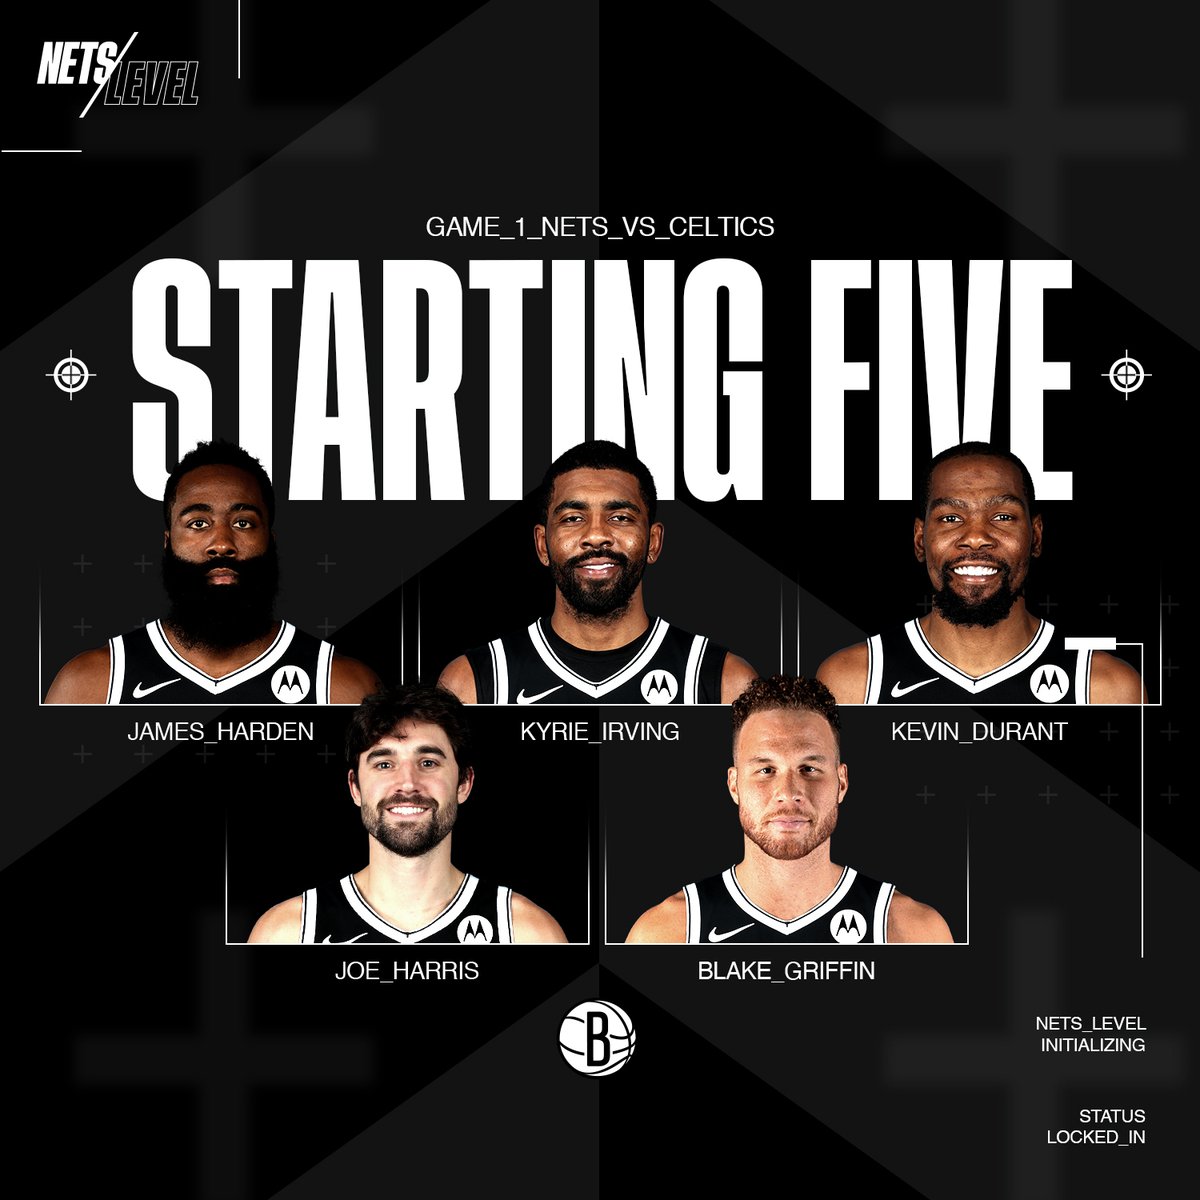 Brooklyn Nets on Twitter "Your GAME 1 STARTING 5 ️ JHarden13 ️